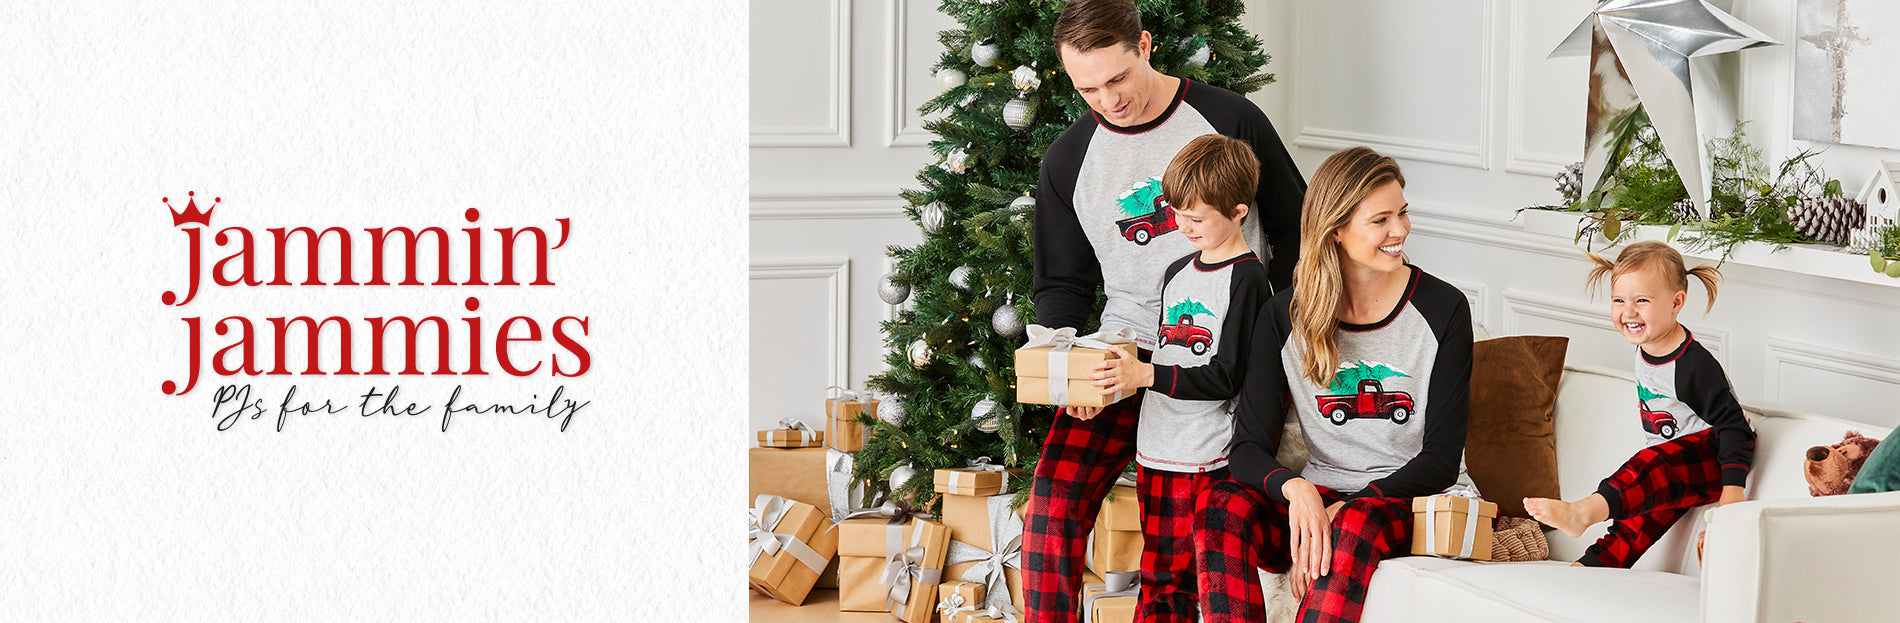 Family wearing PJs Holiday Tree-Truckin Collection